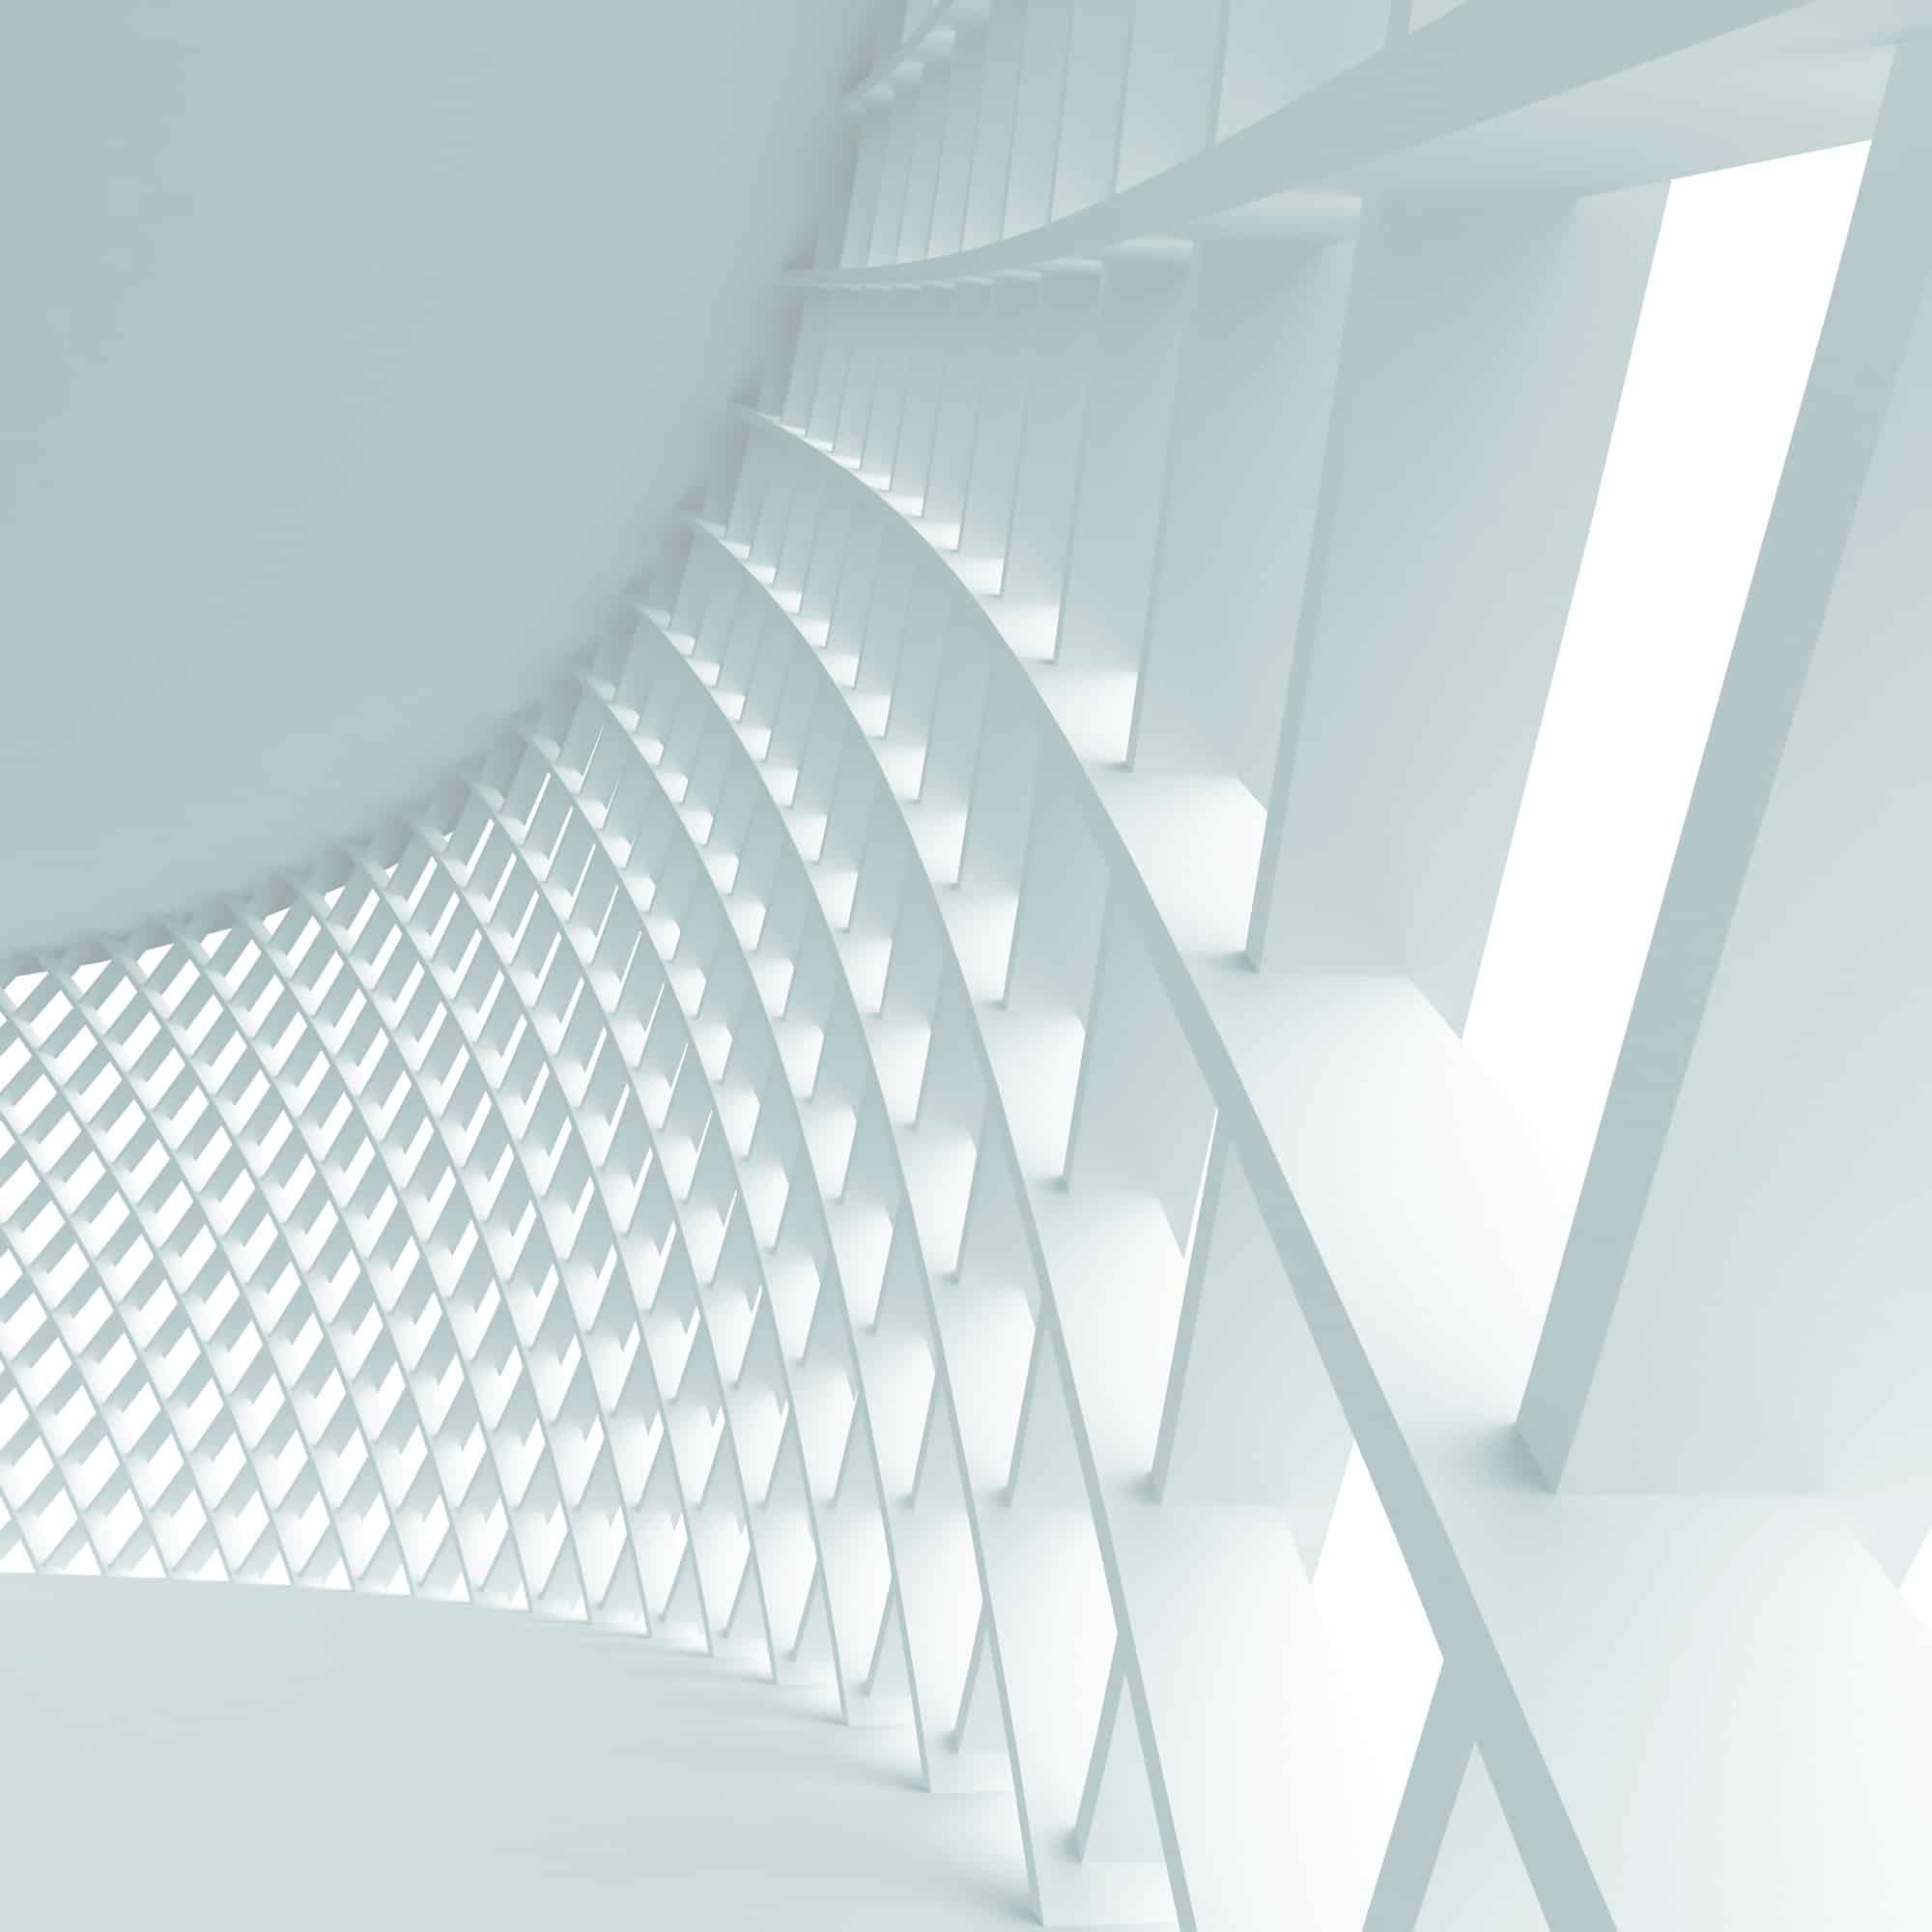 Abstract image of a geometric pattern with repetitive white shapes forming a tunnel-like structure, serving as a cover.